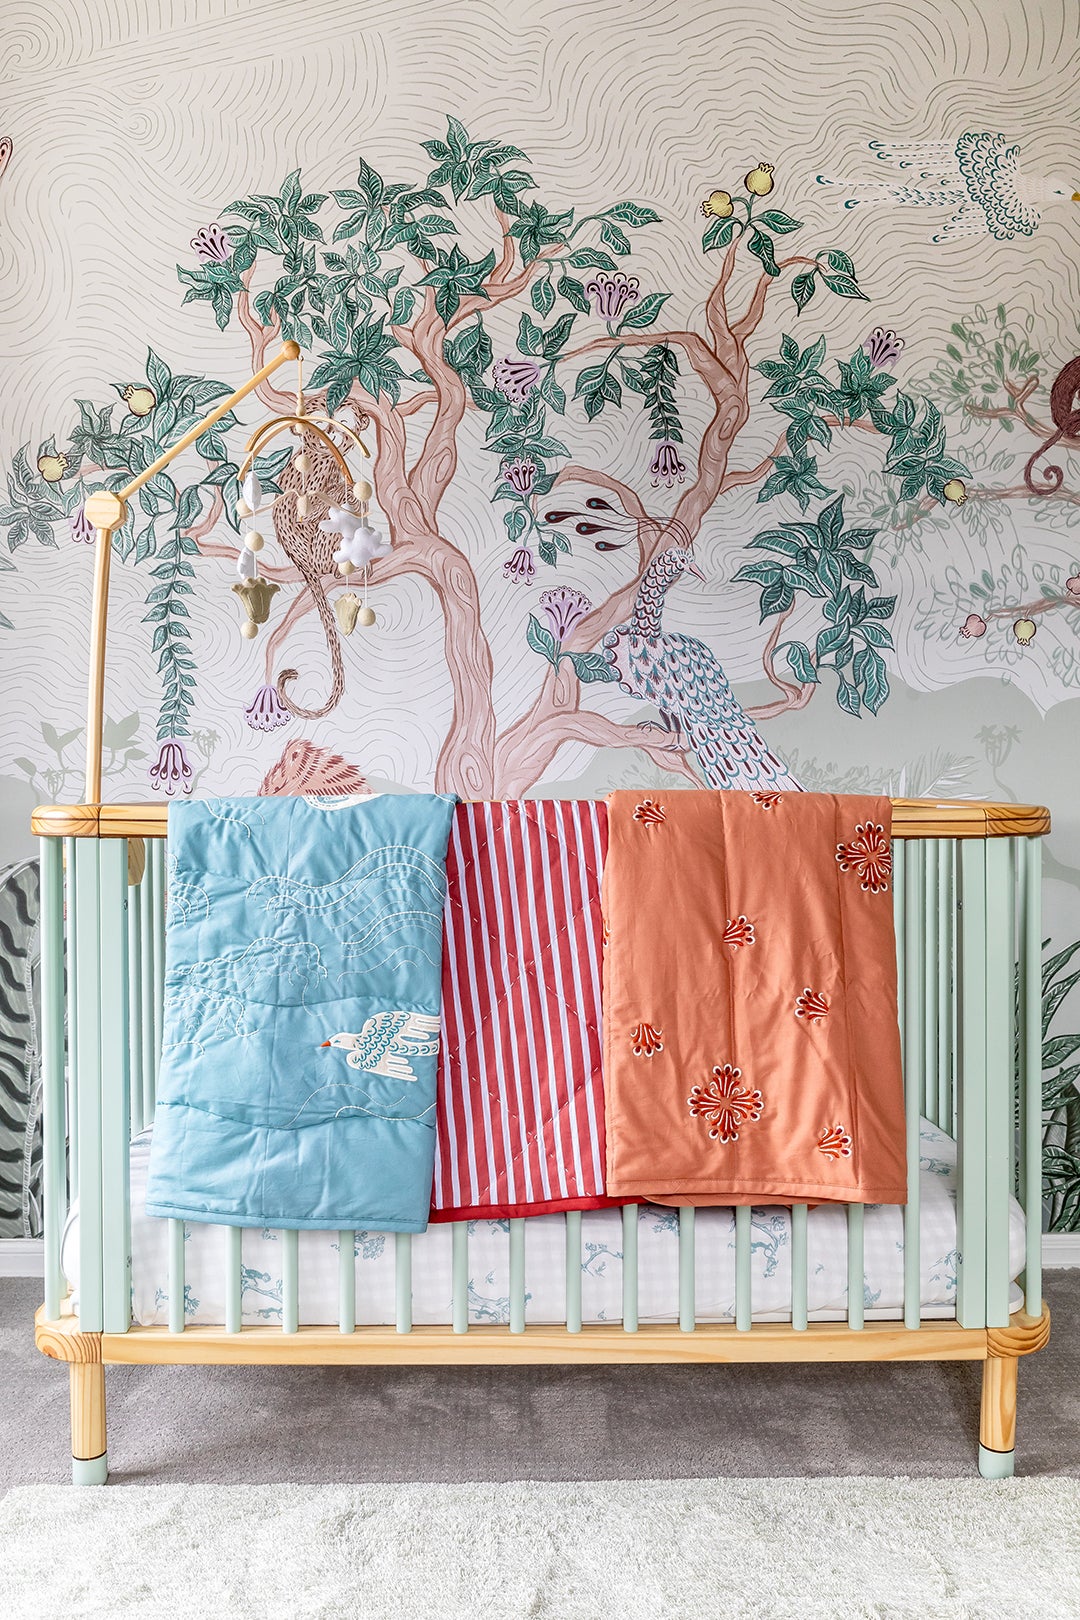 quilts draped over crib